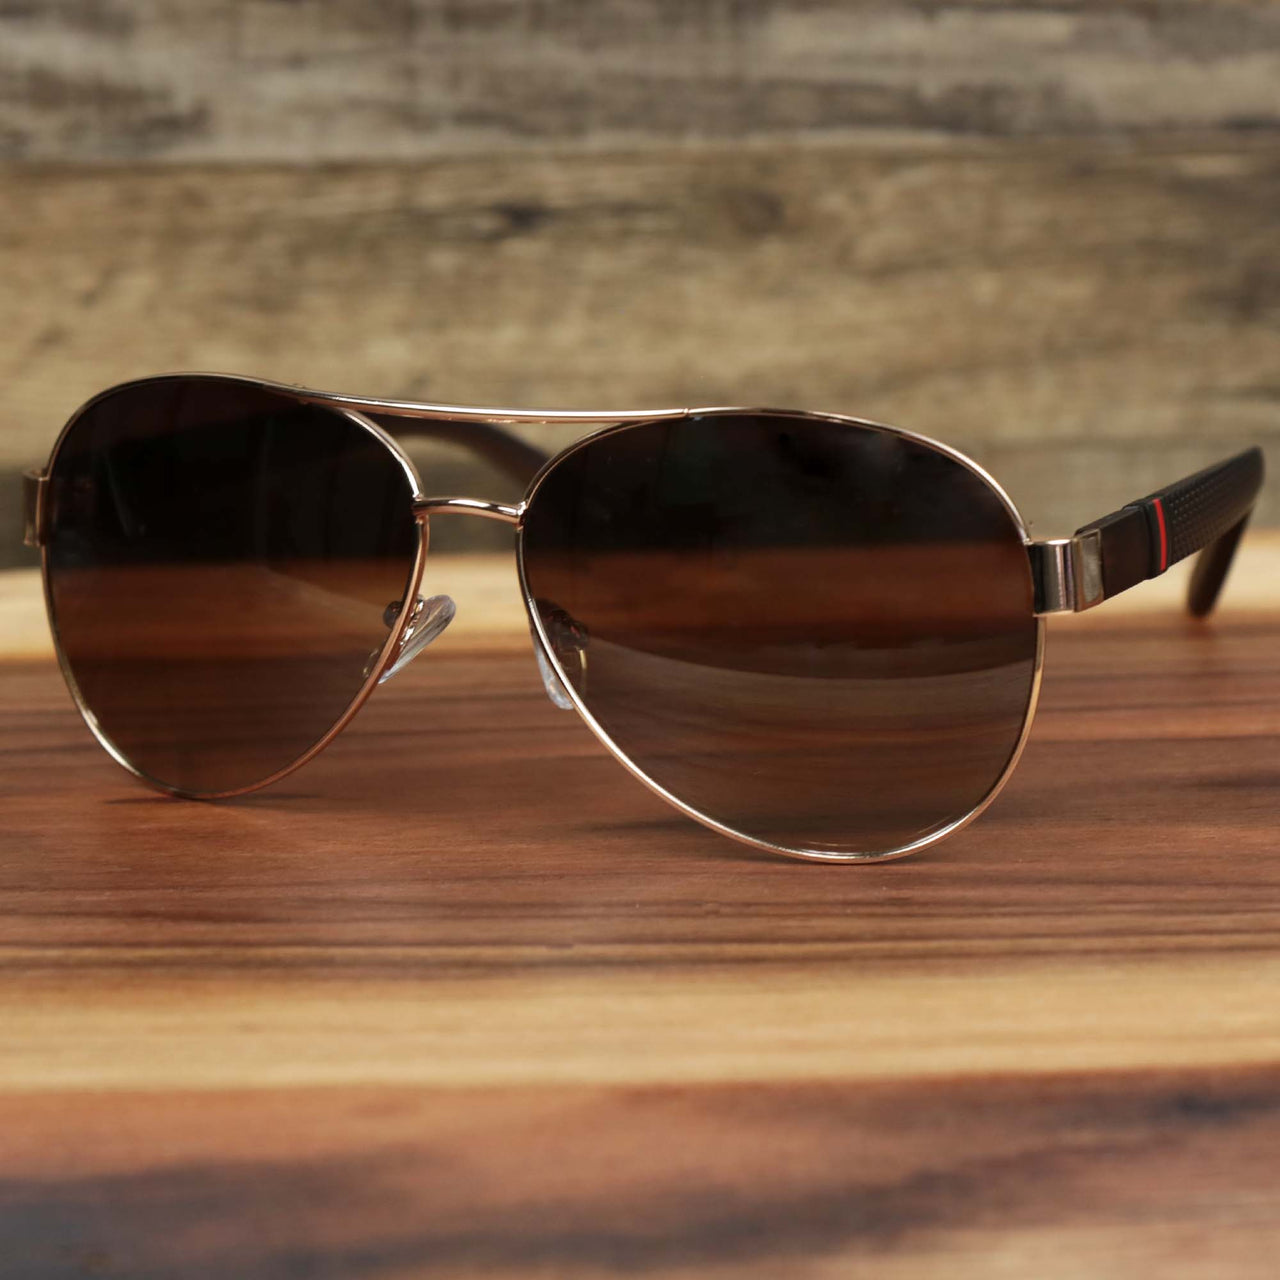 The Aviator Frame Racing Stripes Brown Lens Sunglasses with Rose Gold Frame